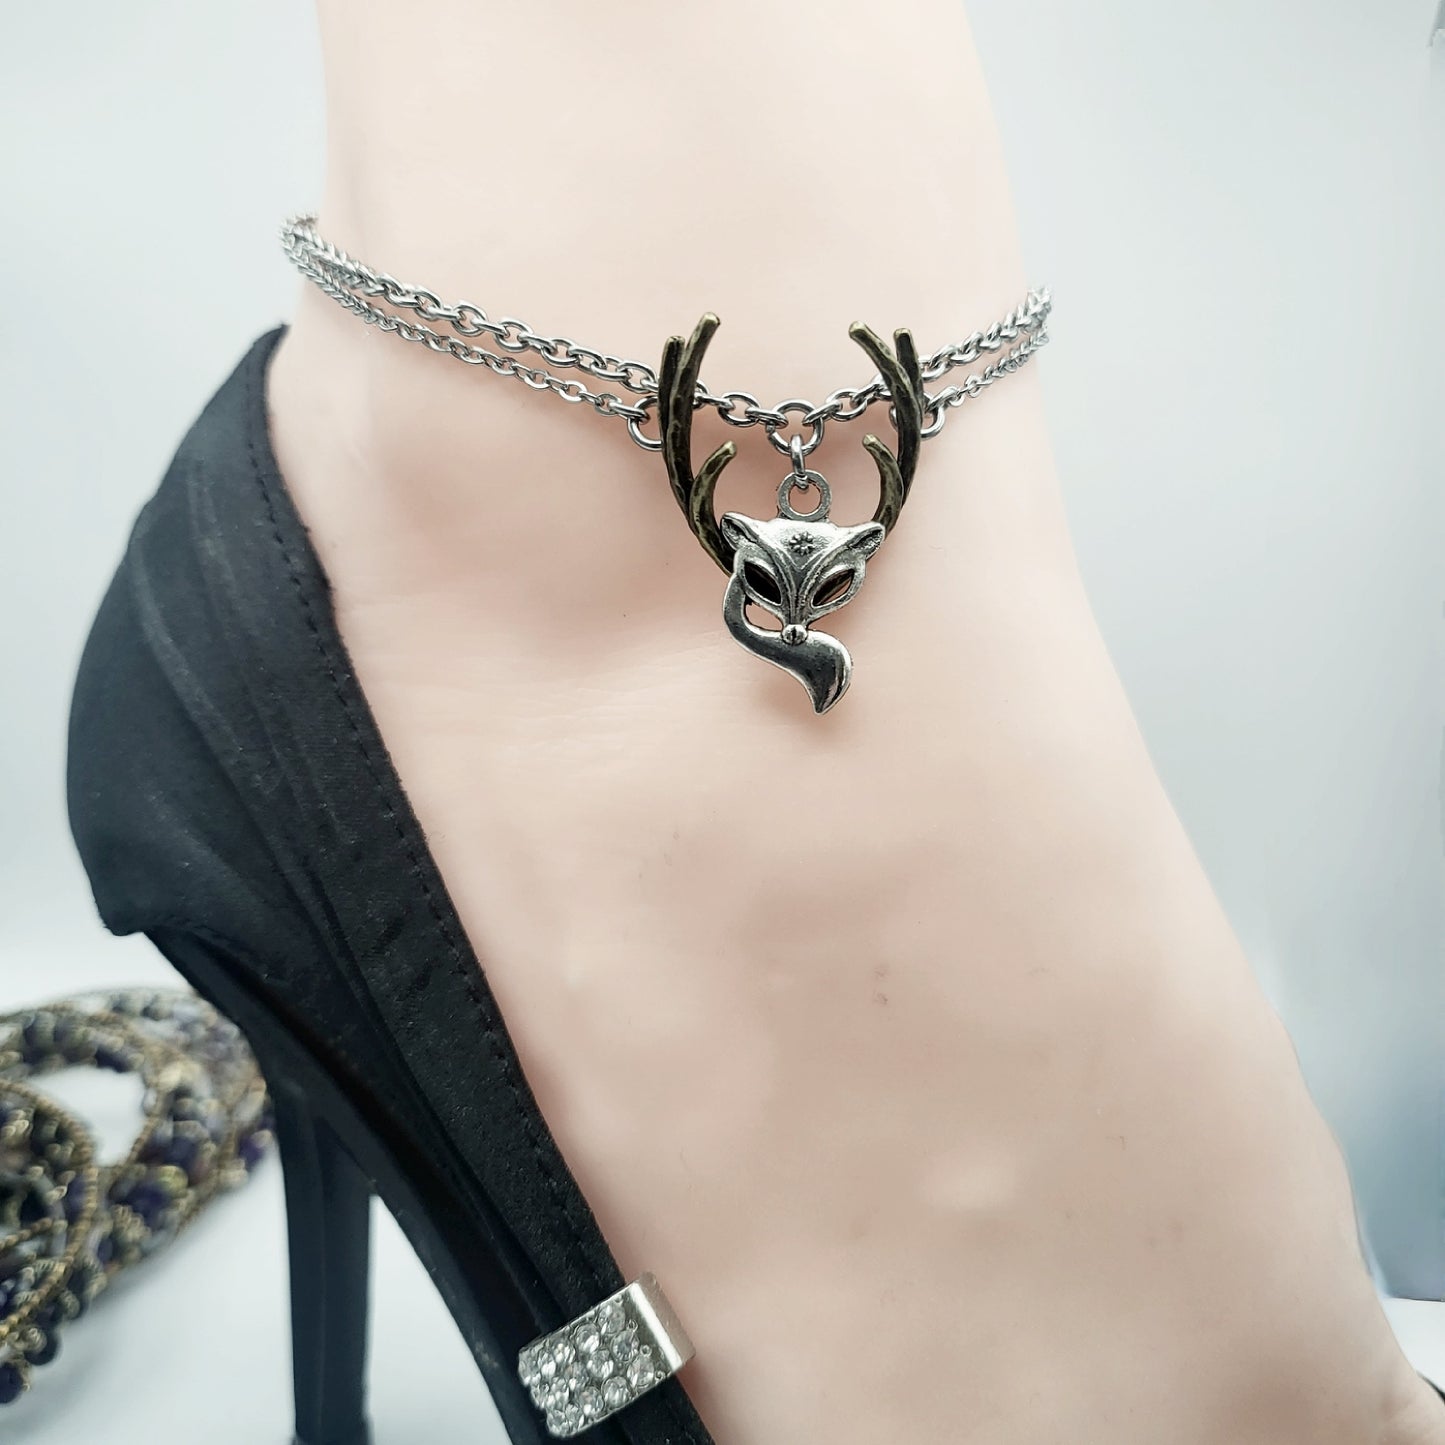 Vixen And Stag Anklet, Vixen Anklet, Hotwife Anklet, Lifestyle Anklet, Hotwife Jewelry, Swinger lifestyle, Hotwife Lifestyle, VixenAndStag